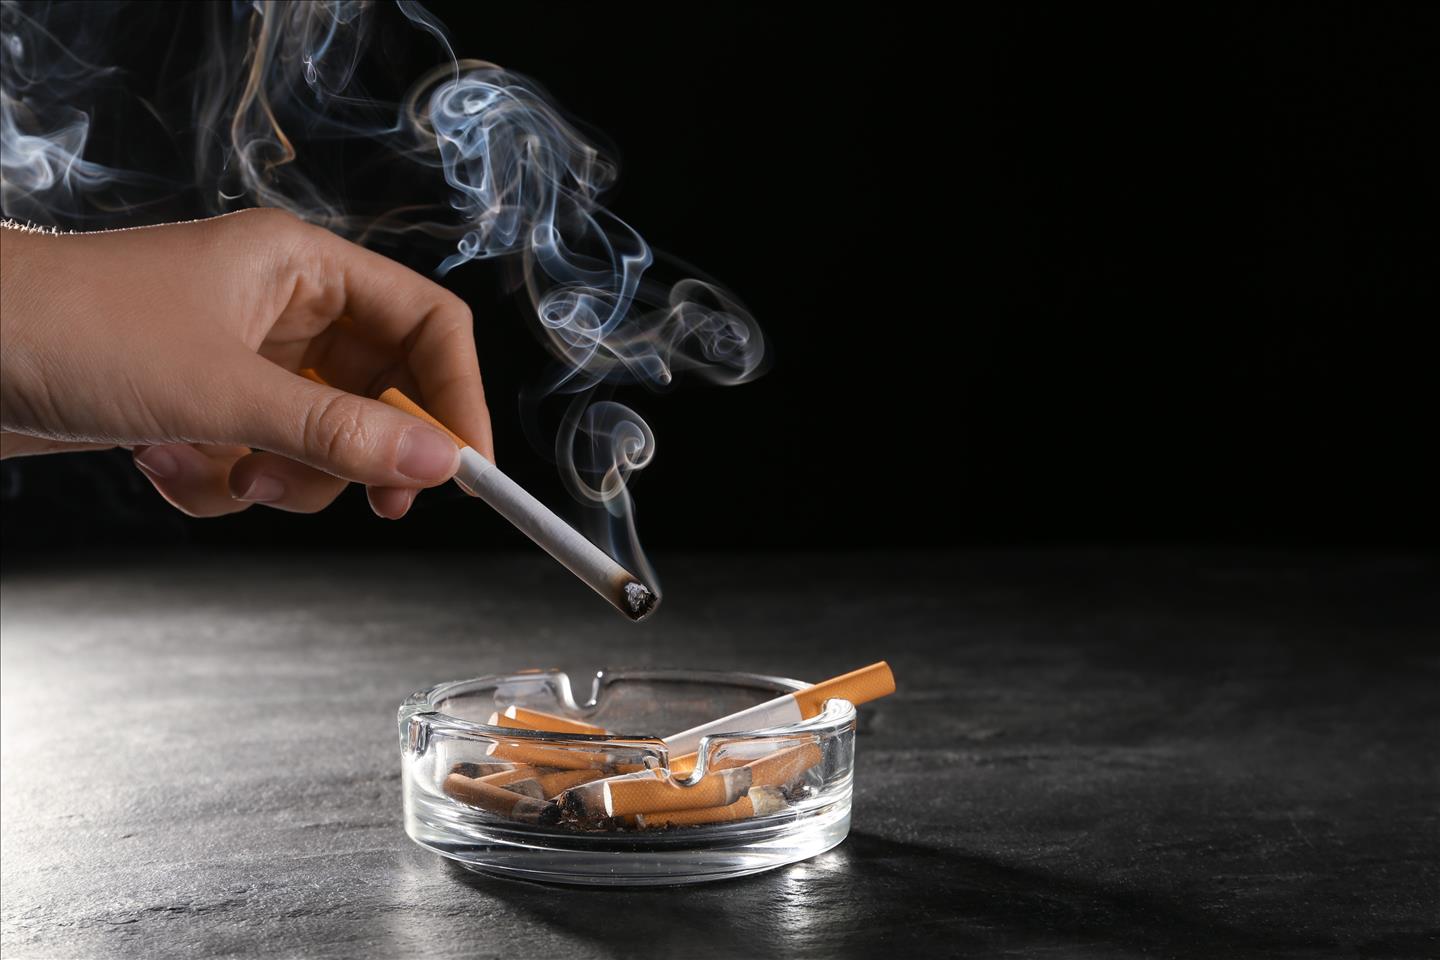 Why Big Tobacco's Attempts To Rehabilitate Its Image Are So Dangerous